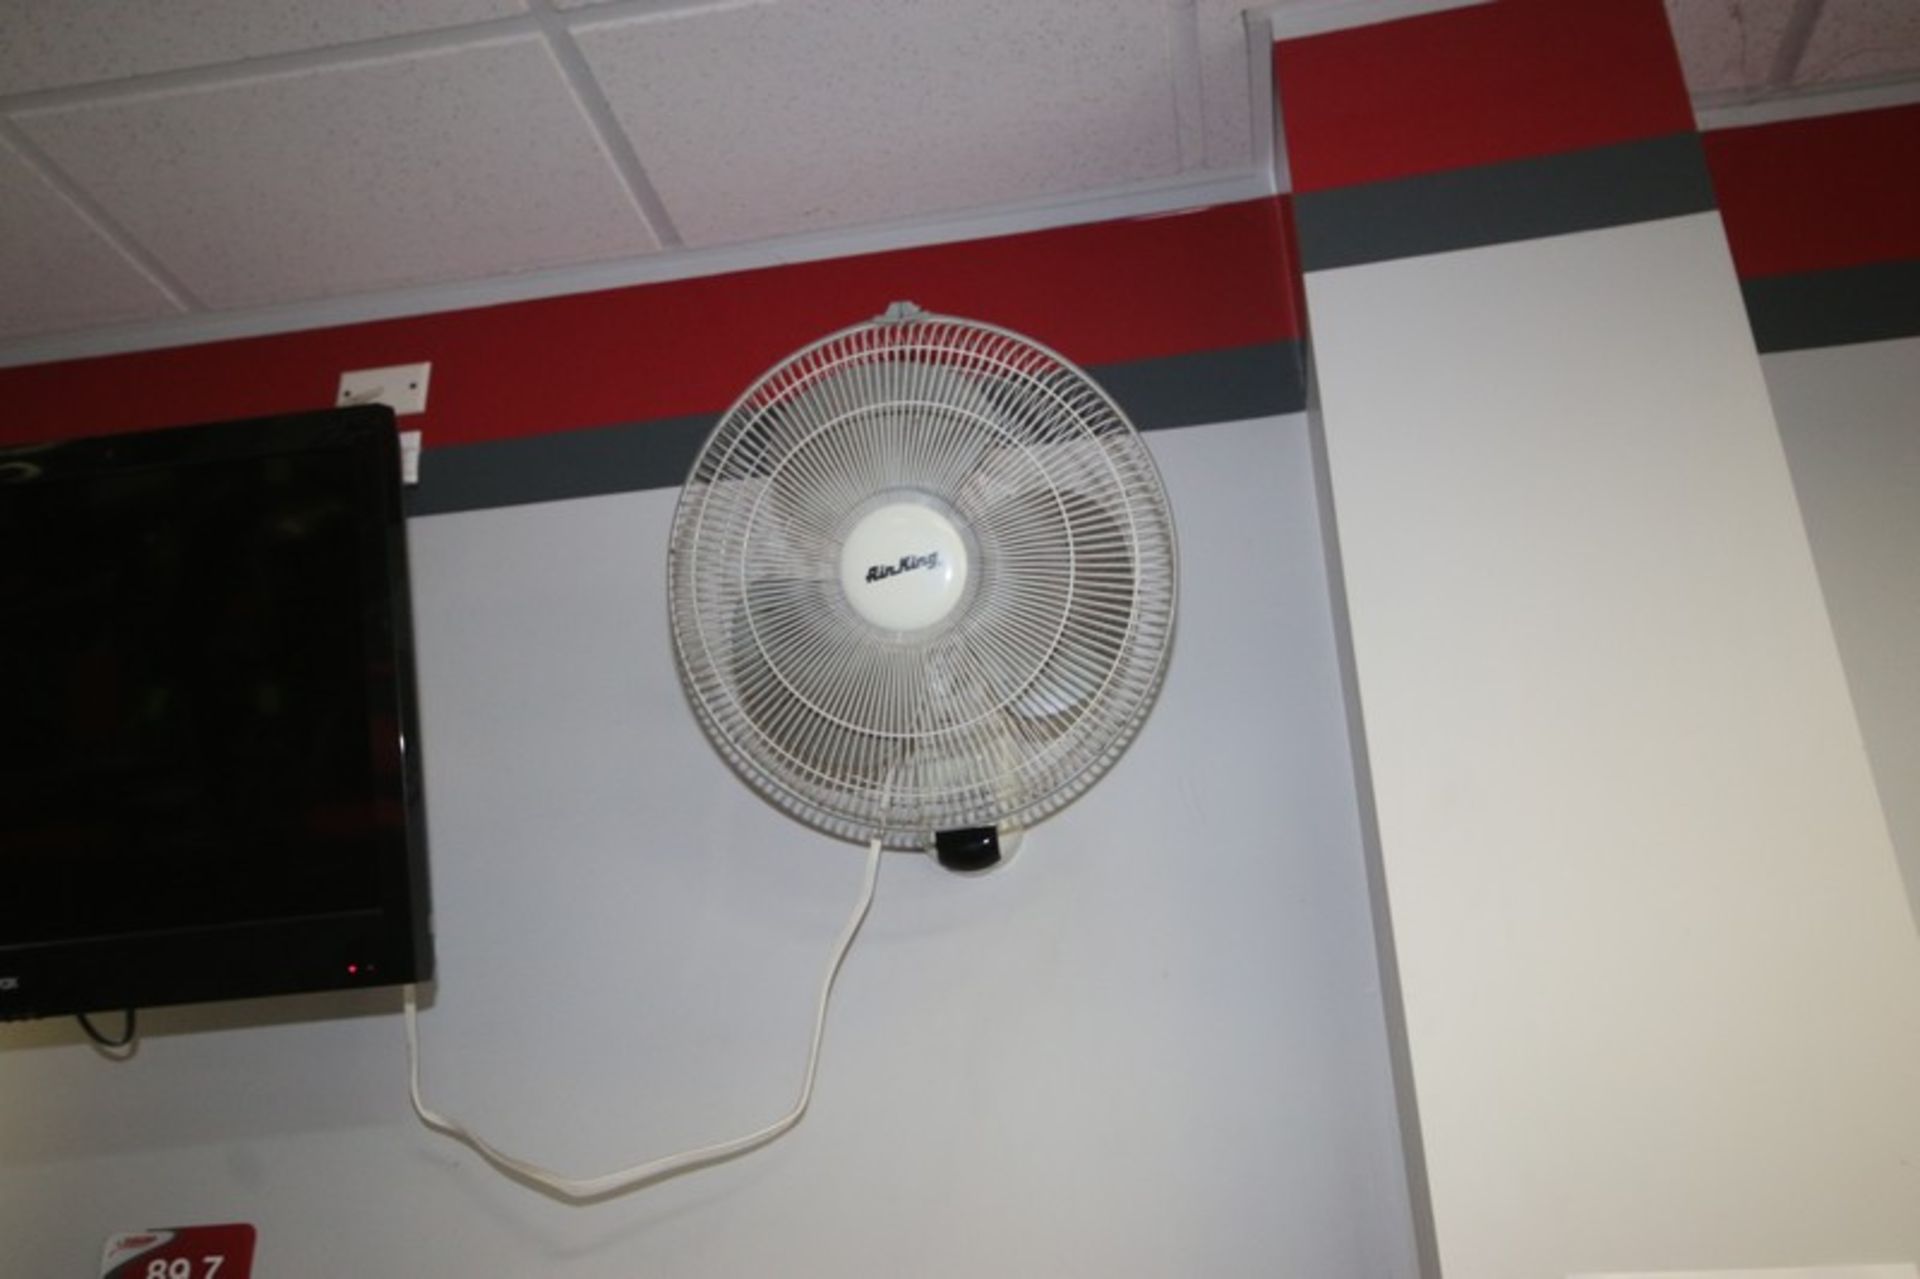 (3) Air King Wall Mounted Fans (LOCATED @ 2800 GOLDEN MILE HWY, ROUTE 286, PITTSBURGH, PA 15239)